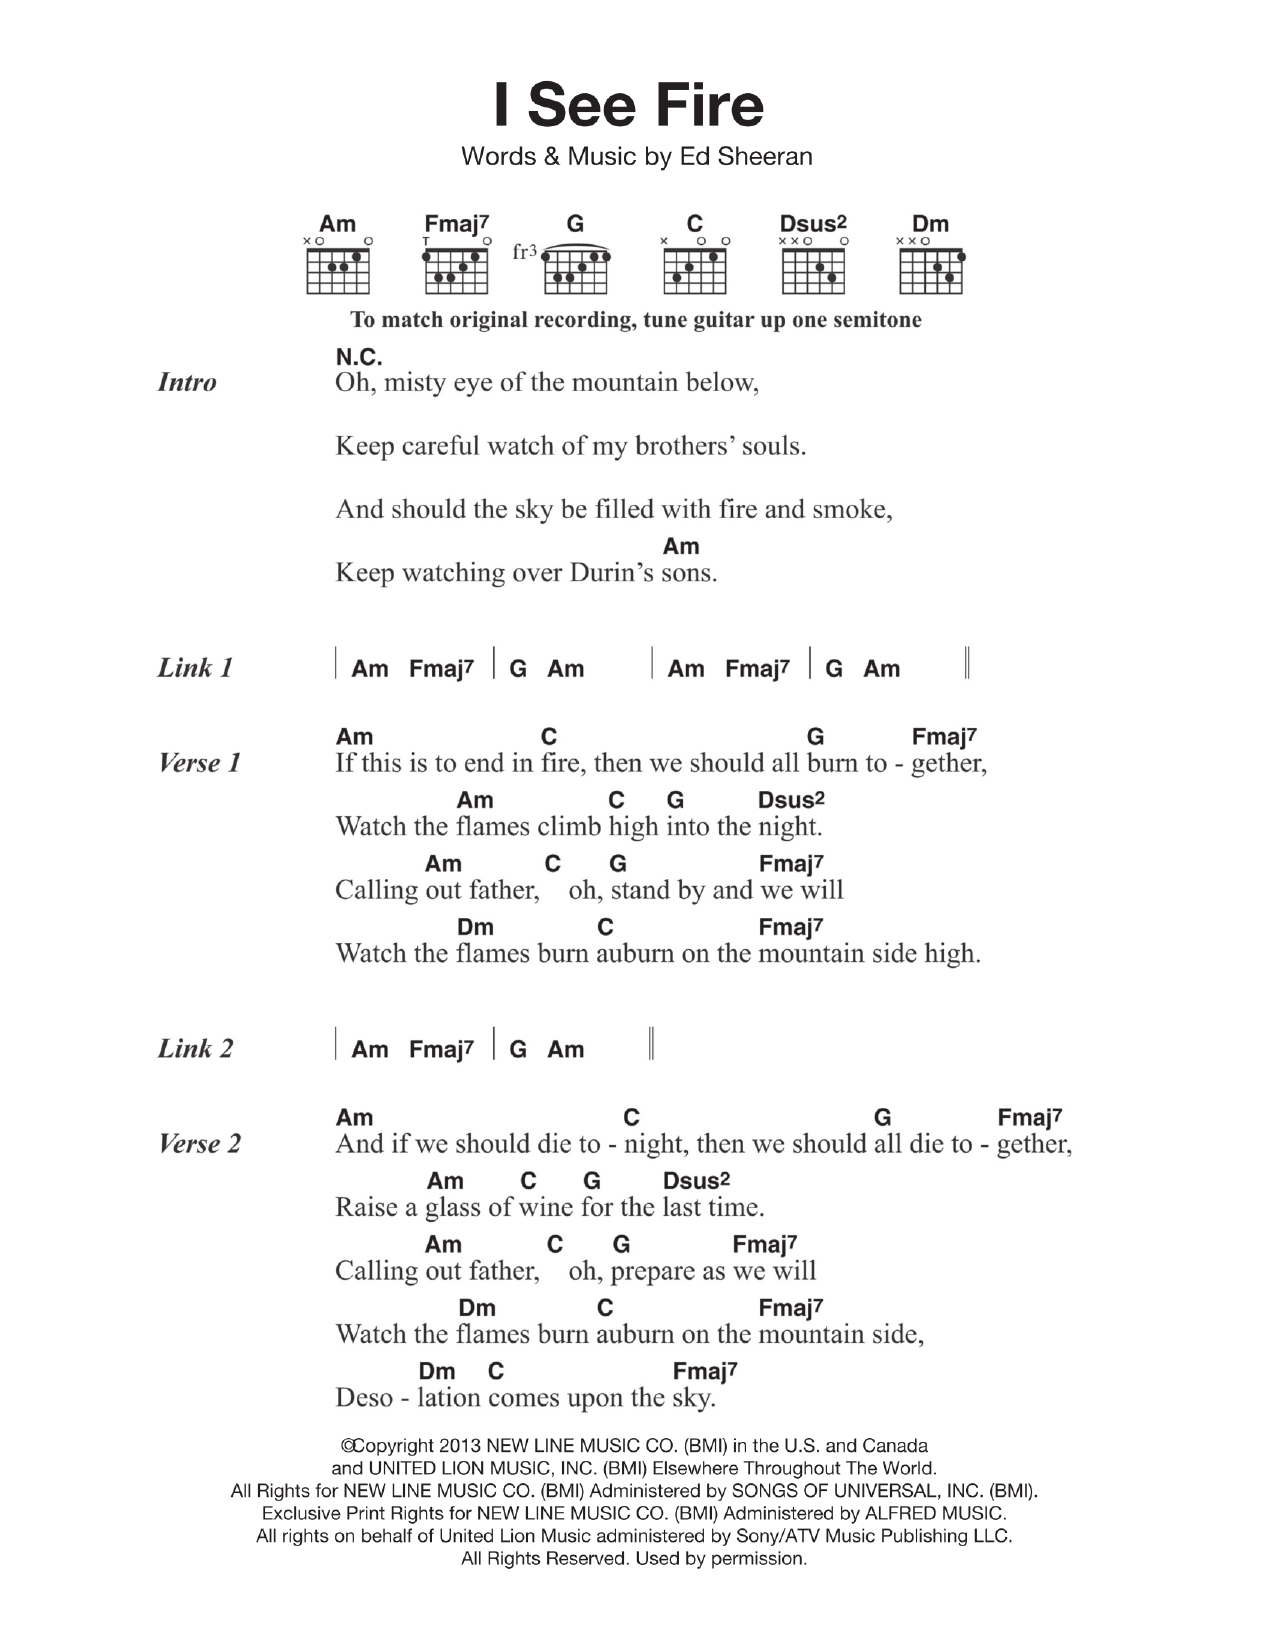 Download Ed Sheeran I See Fire (from The Hobbit) Sheet Music